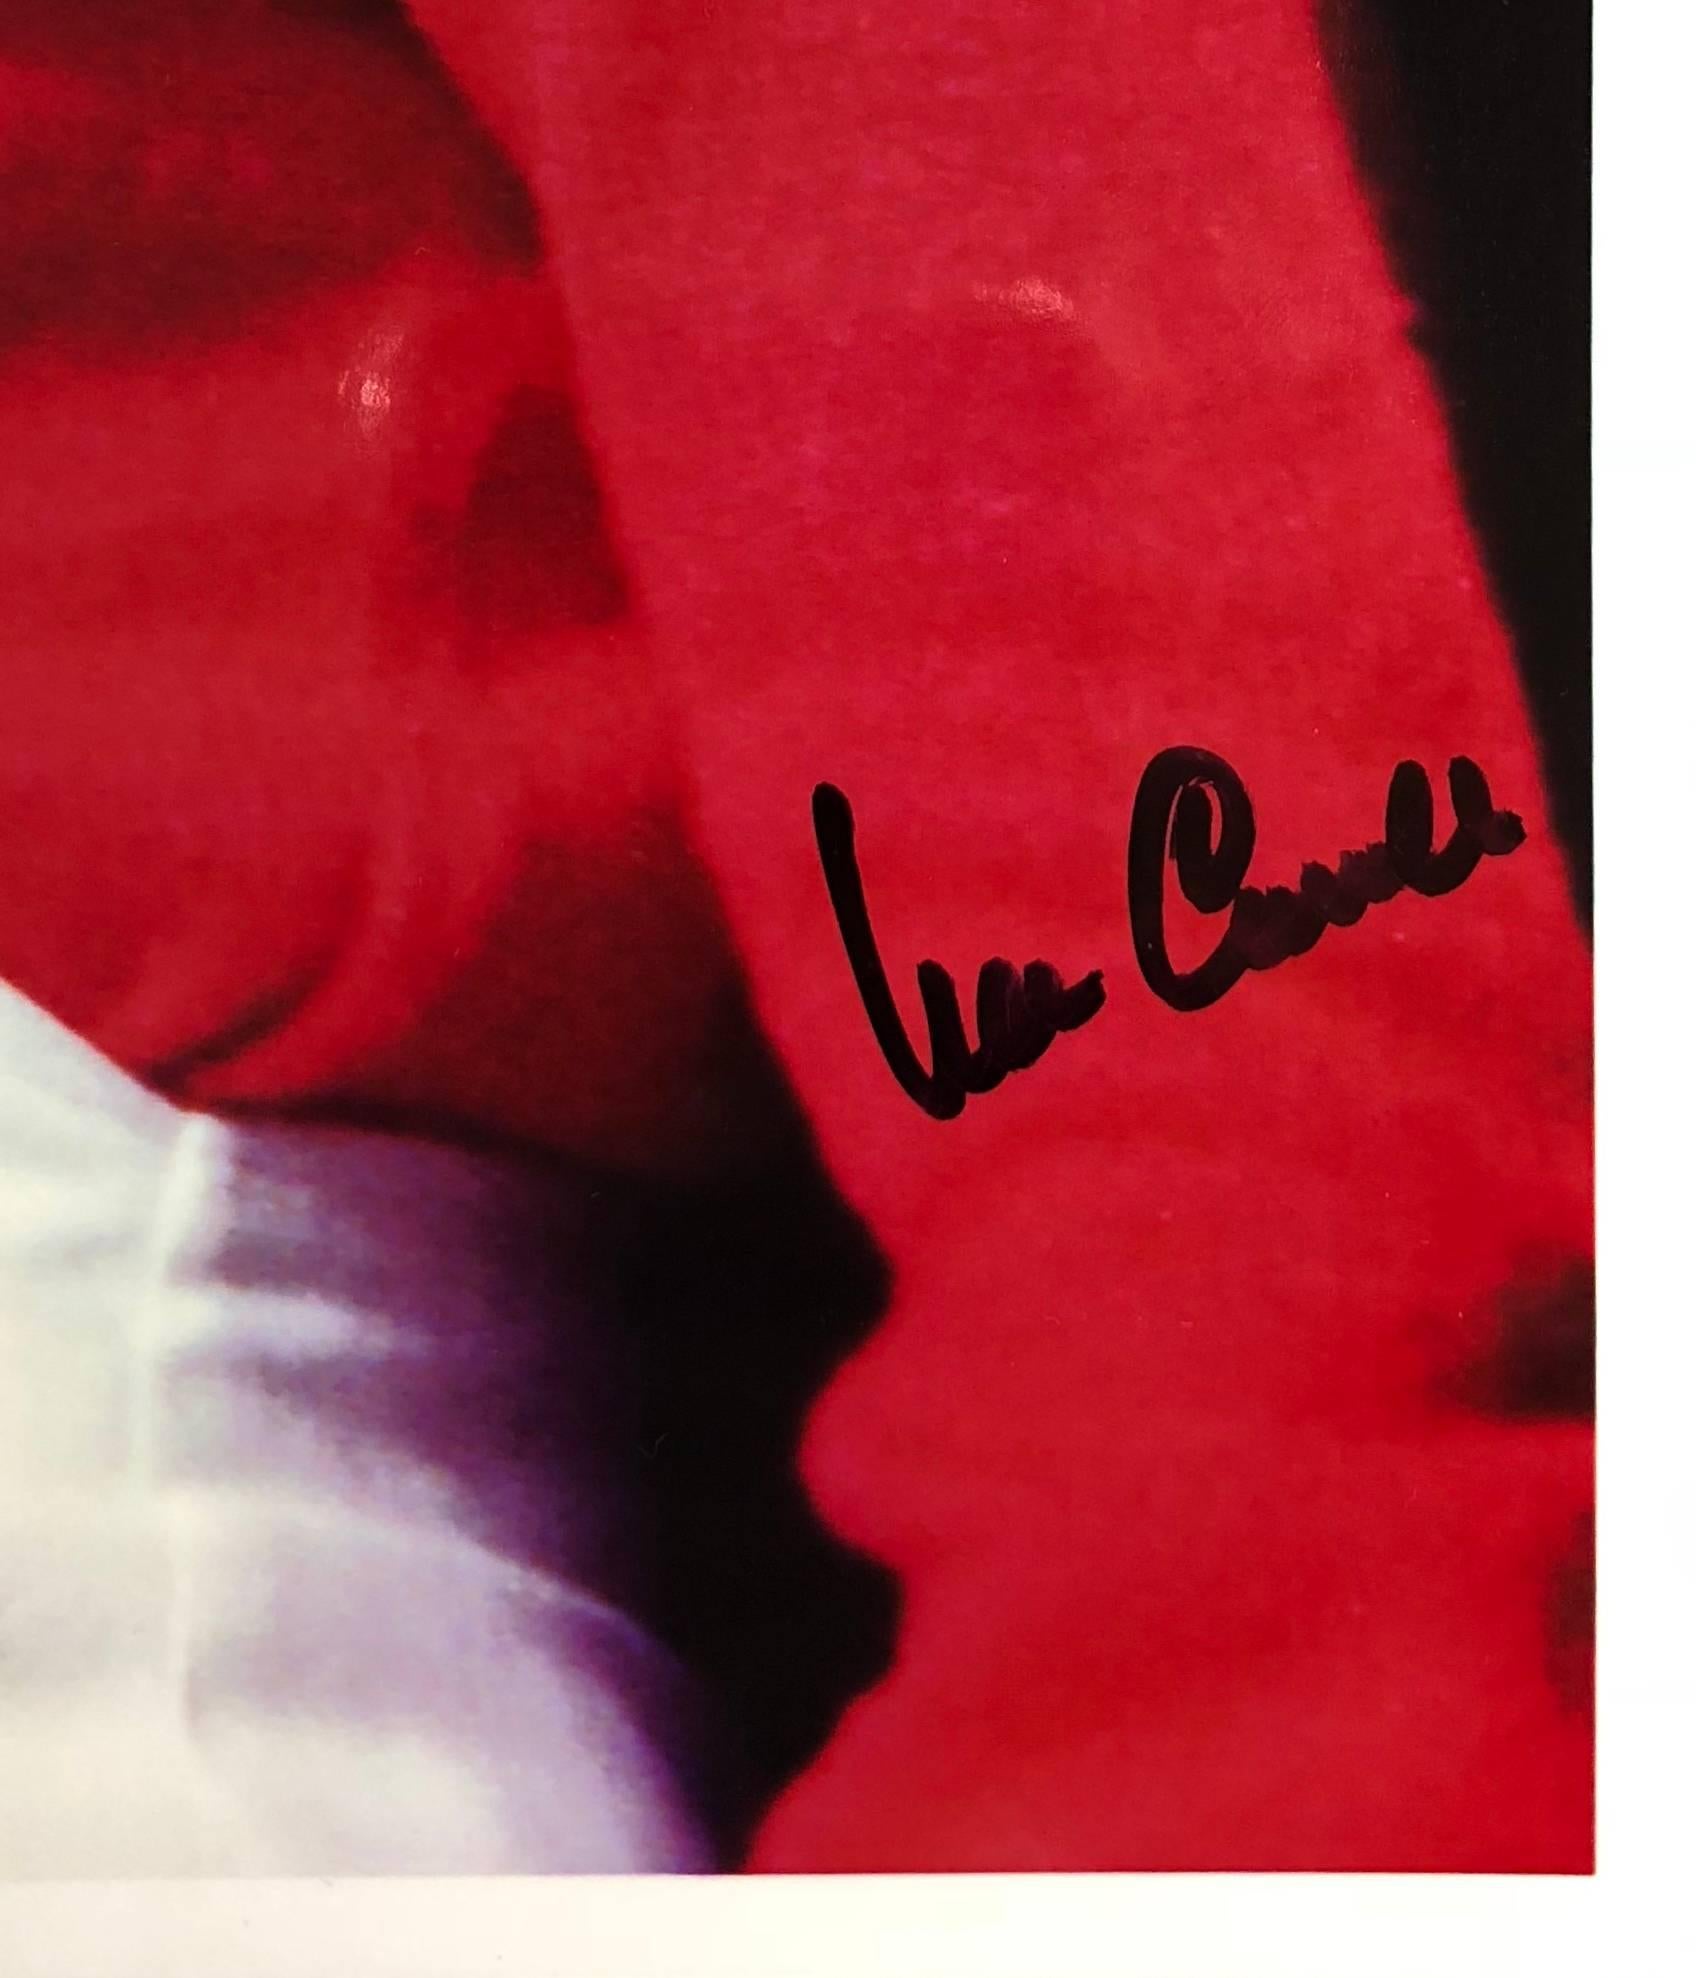 Bill Carroll , Norma Jeane #15 (Marilyn Monroe), hand signed  - Photograph by William Carroll